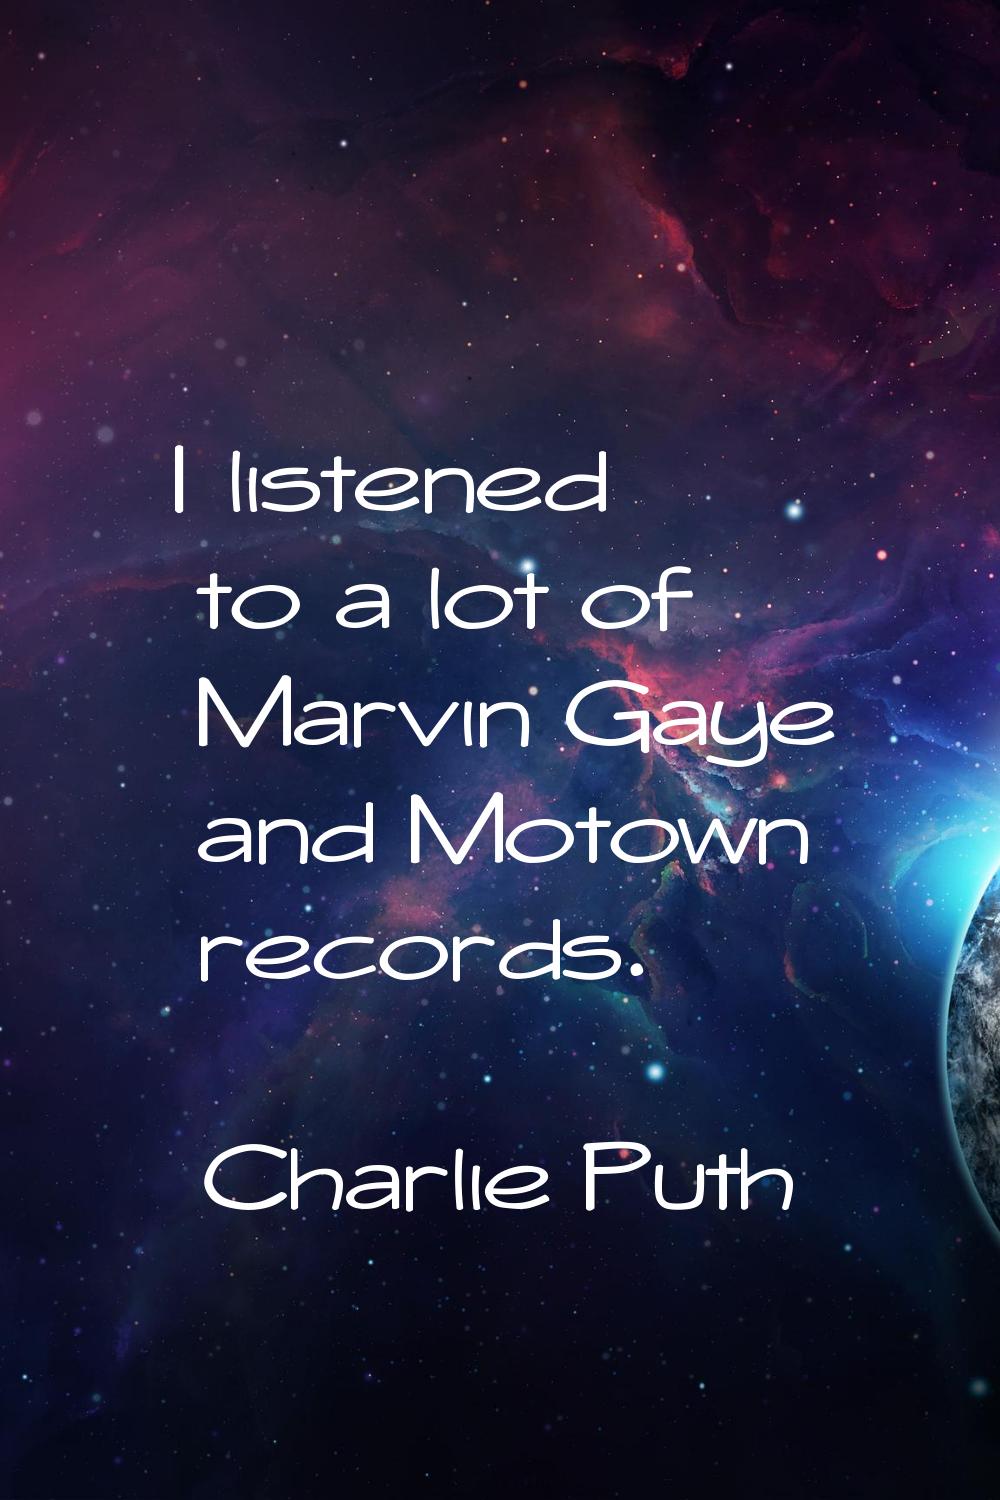 I listened to a lot of Marvin Gaye and Motown records.